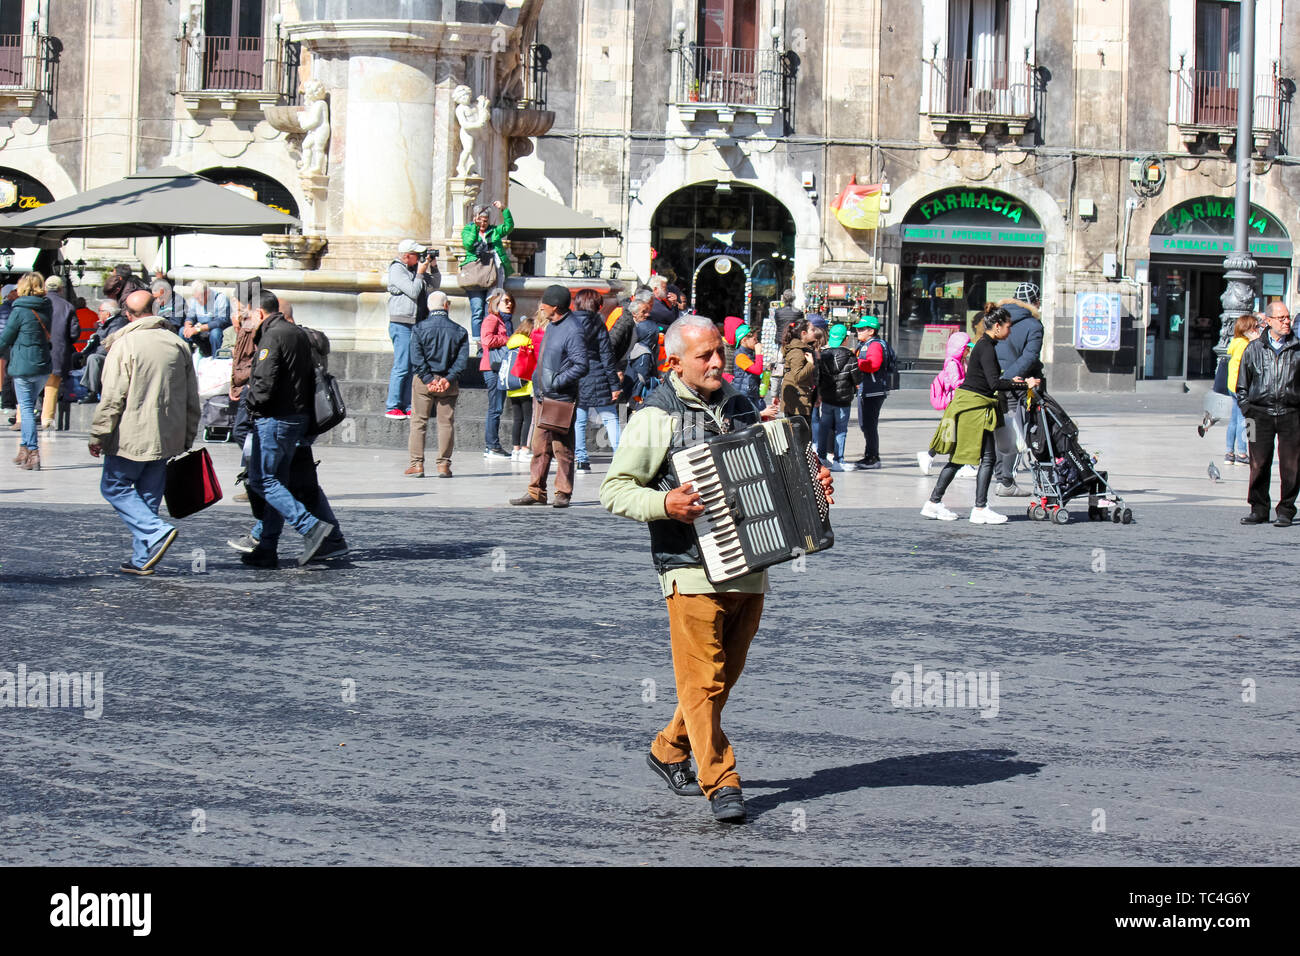 Catania, Sicily, Italy - Apr 10th 2019: Older man busker playing accordion on the Piazza Duomo square in the city center. Cultural street performance. Stock Photo